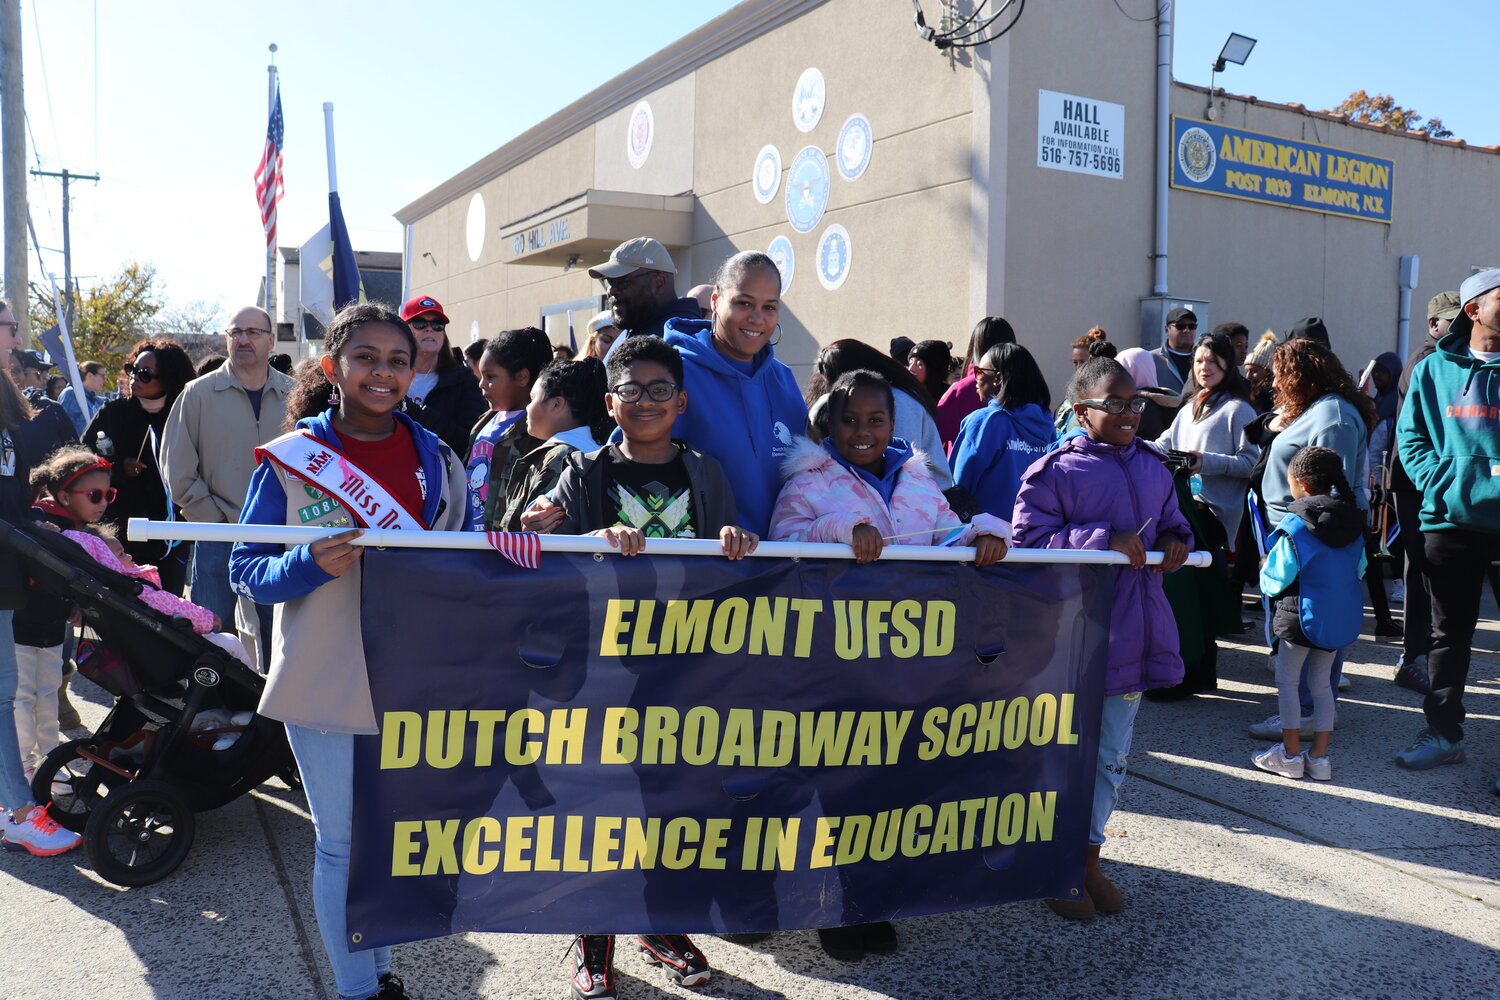 Selene Ferdinand, Sawyer Stead, Cynthia Quasimodo, principal of Dutch Broadway School, Arielle Occelin and Allyson Occelin, were all excited to march in the parade last Saturday.